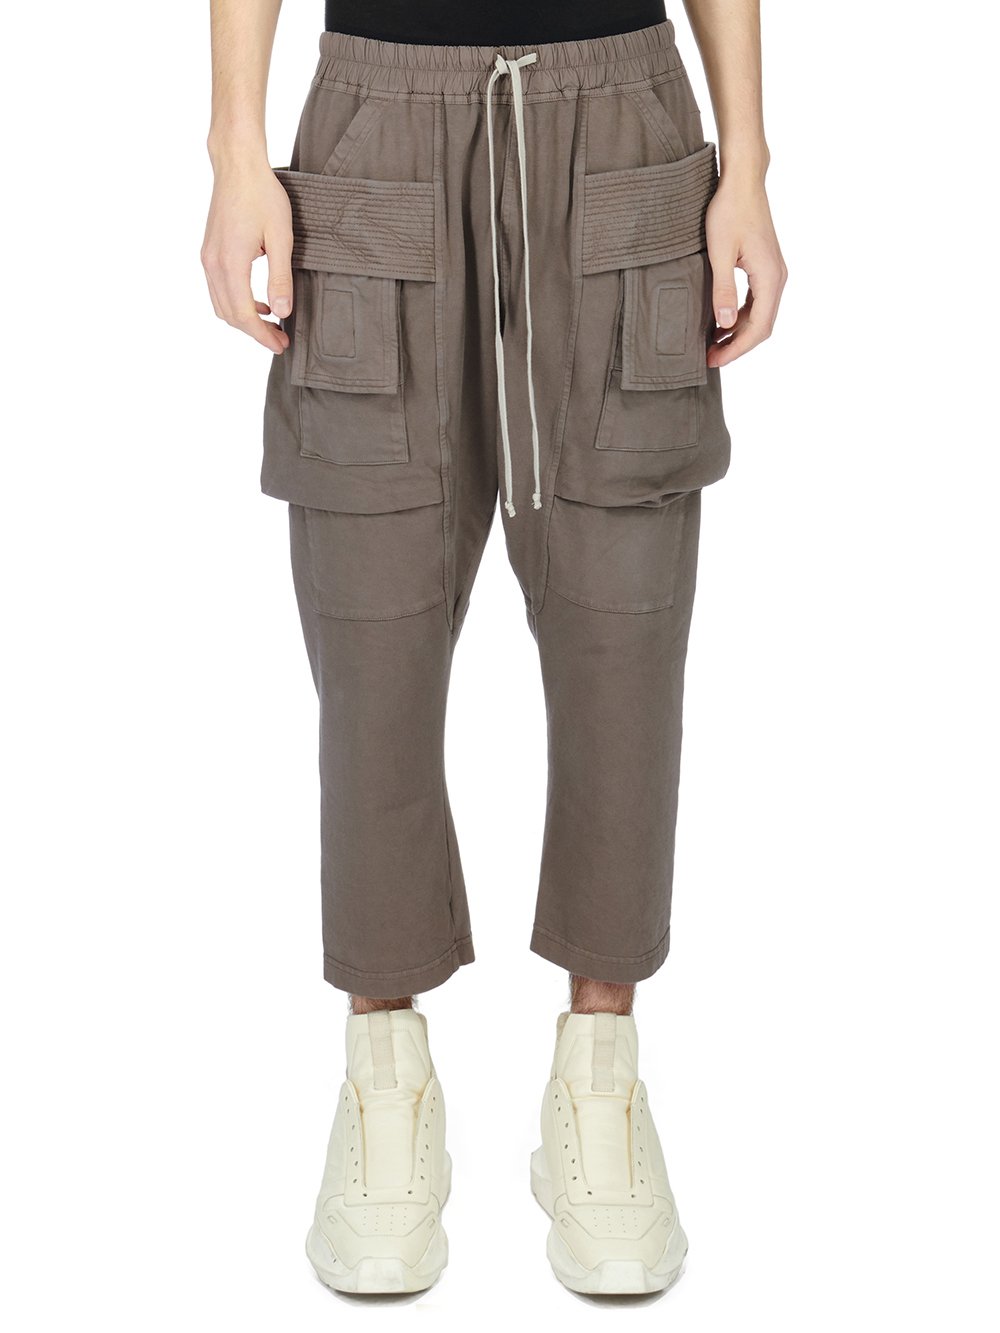 RICK OWENS FW23 LUXOR CREATCH CARGO CROPPED DRAWSTRING IN DUST COMPACT HEAVY COTTON JERSEY